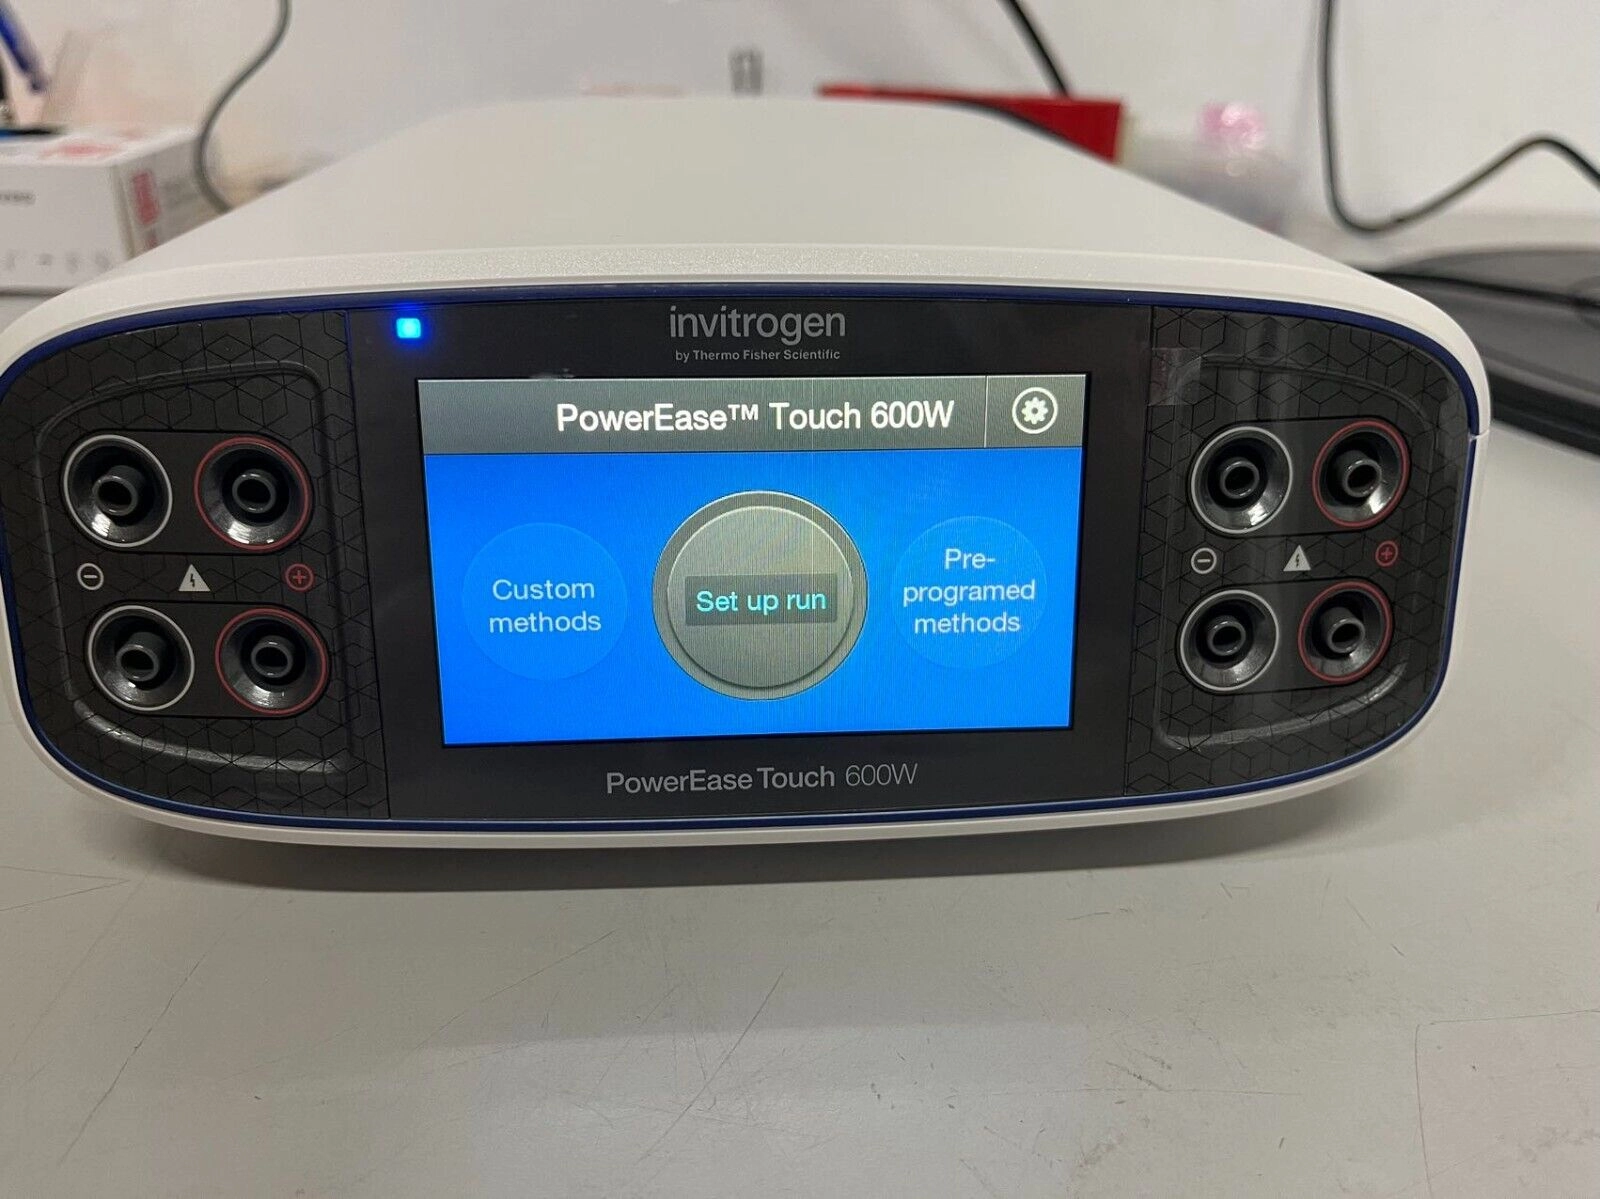 Thermo Fisher invitrogen PowerEase Touch 600W Powe